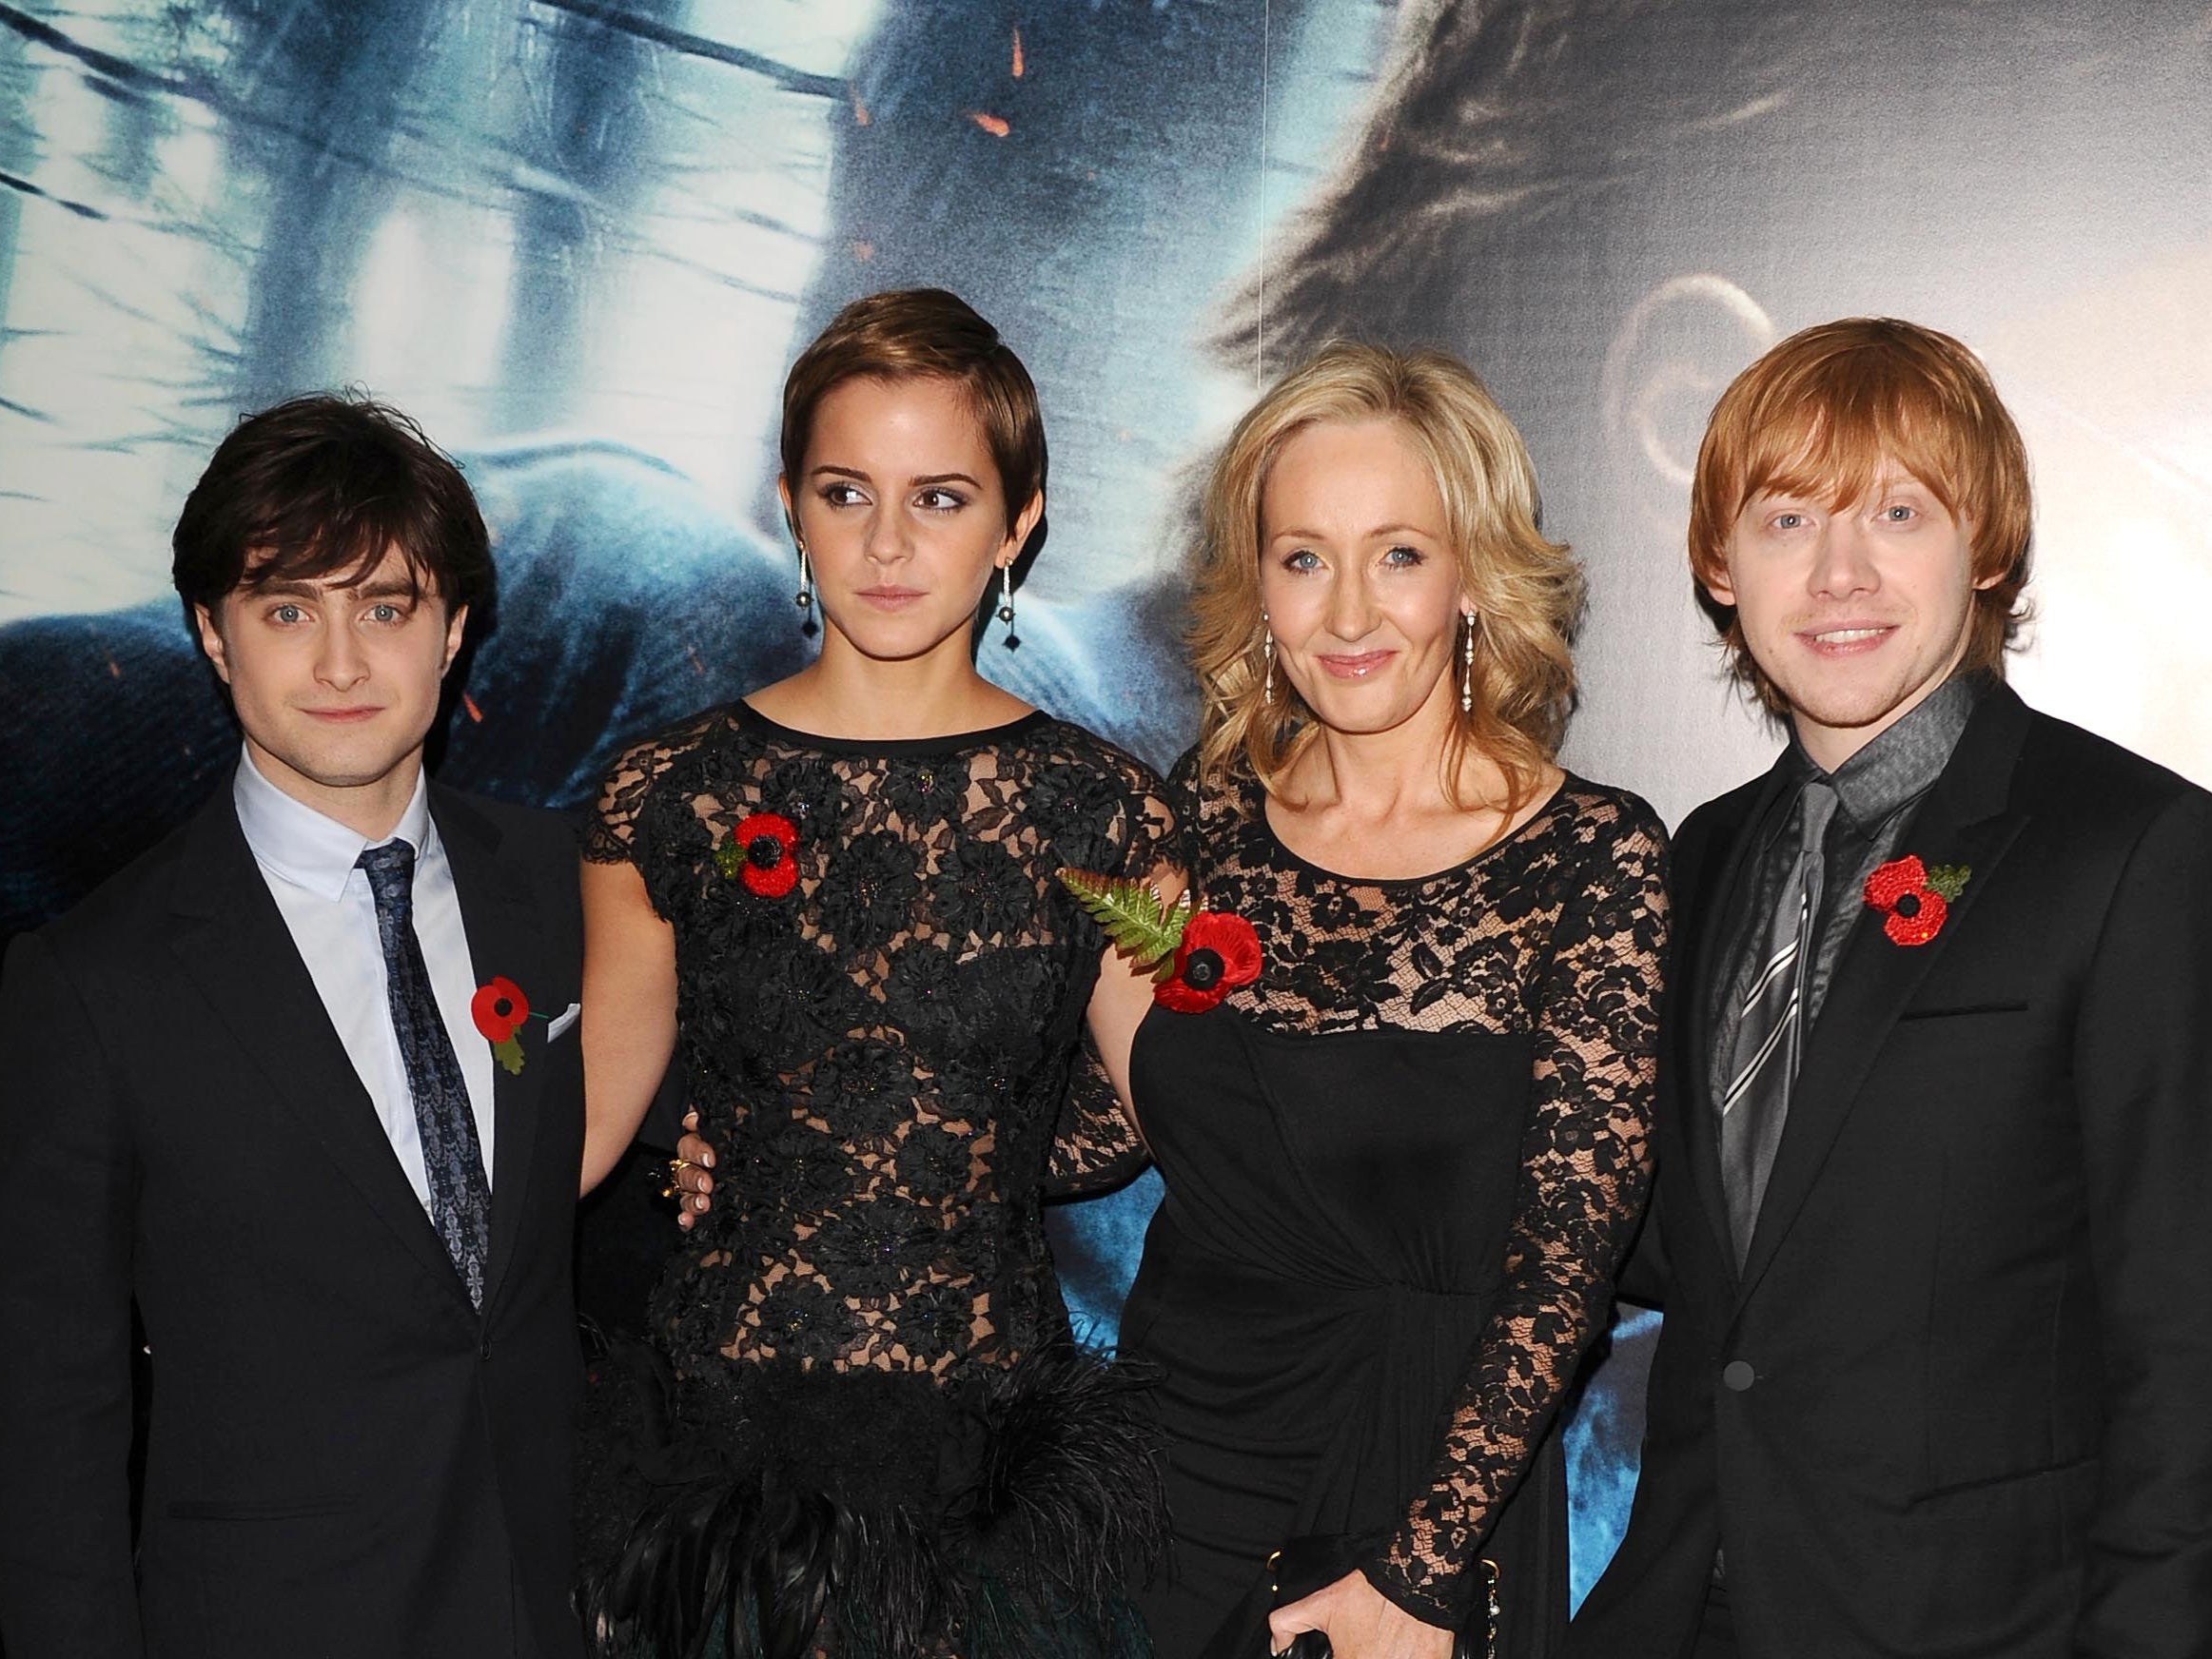 jk rowling podcast reveals how harry potter author u-turned on promise to respect pronouns